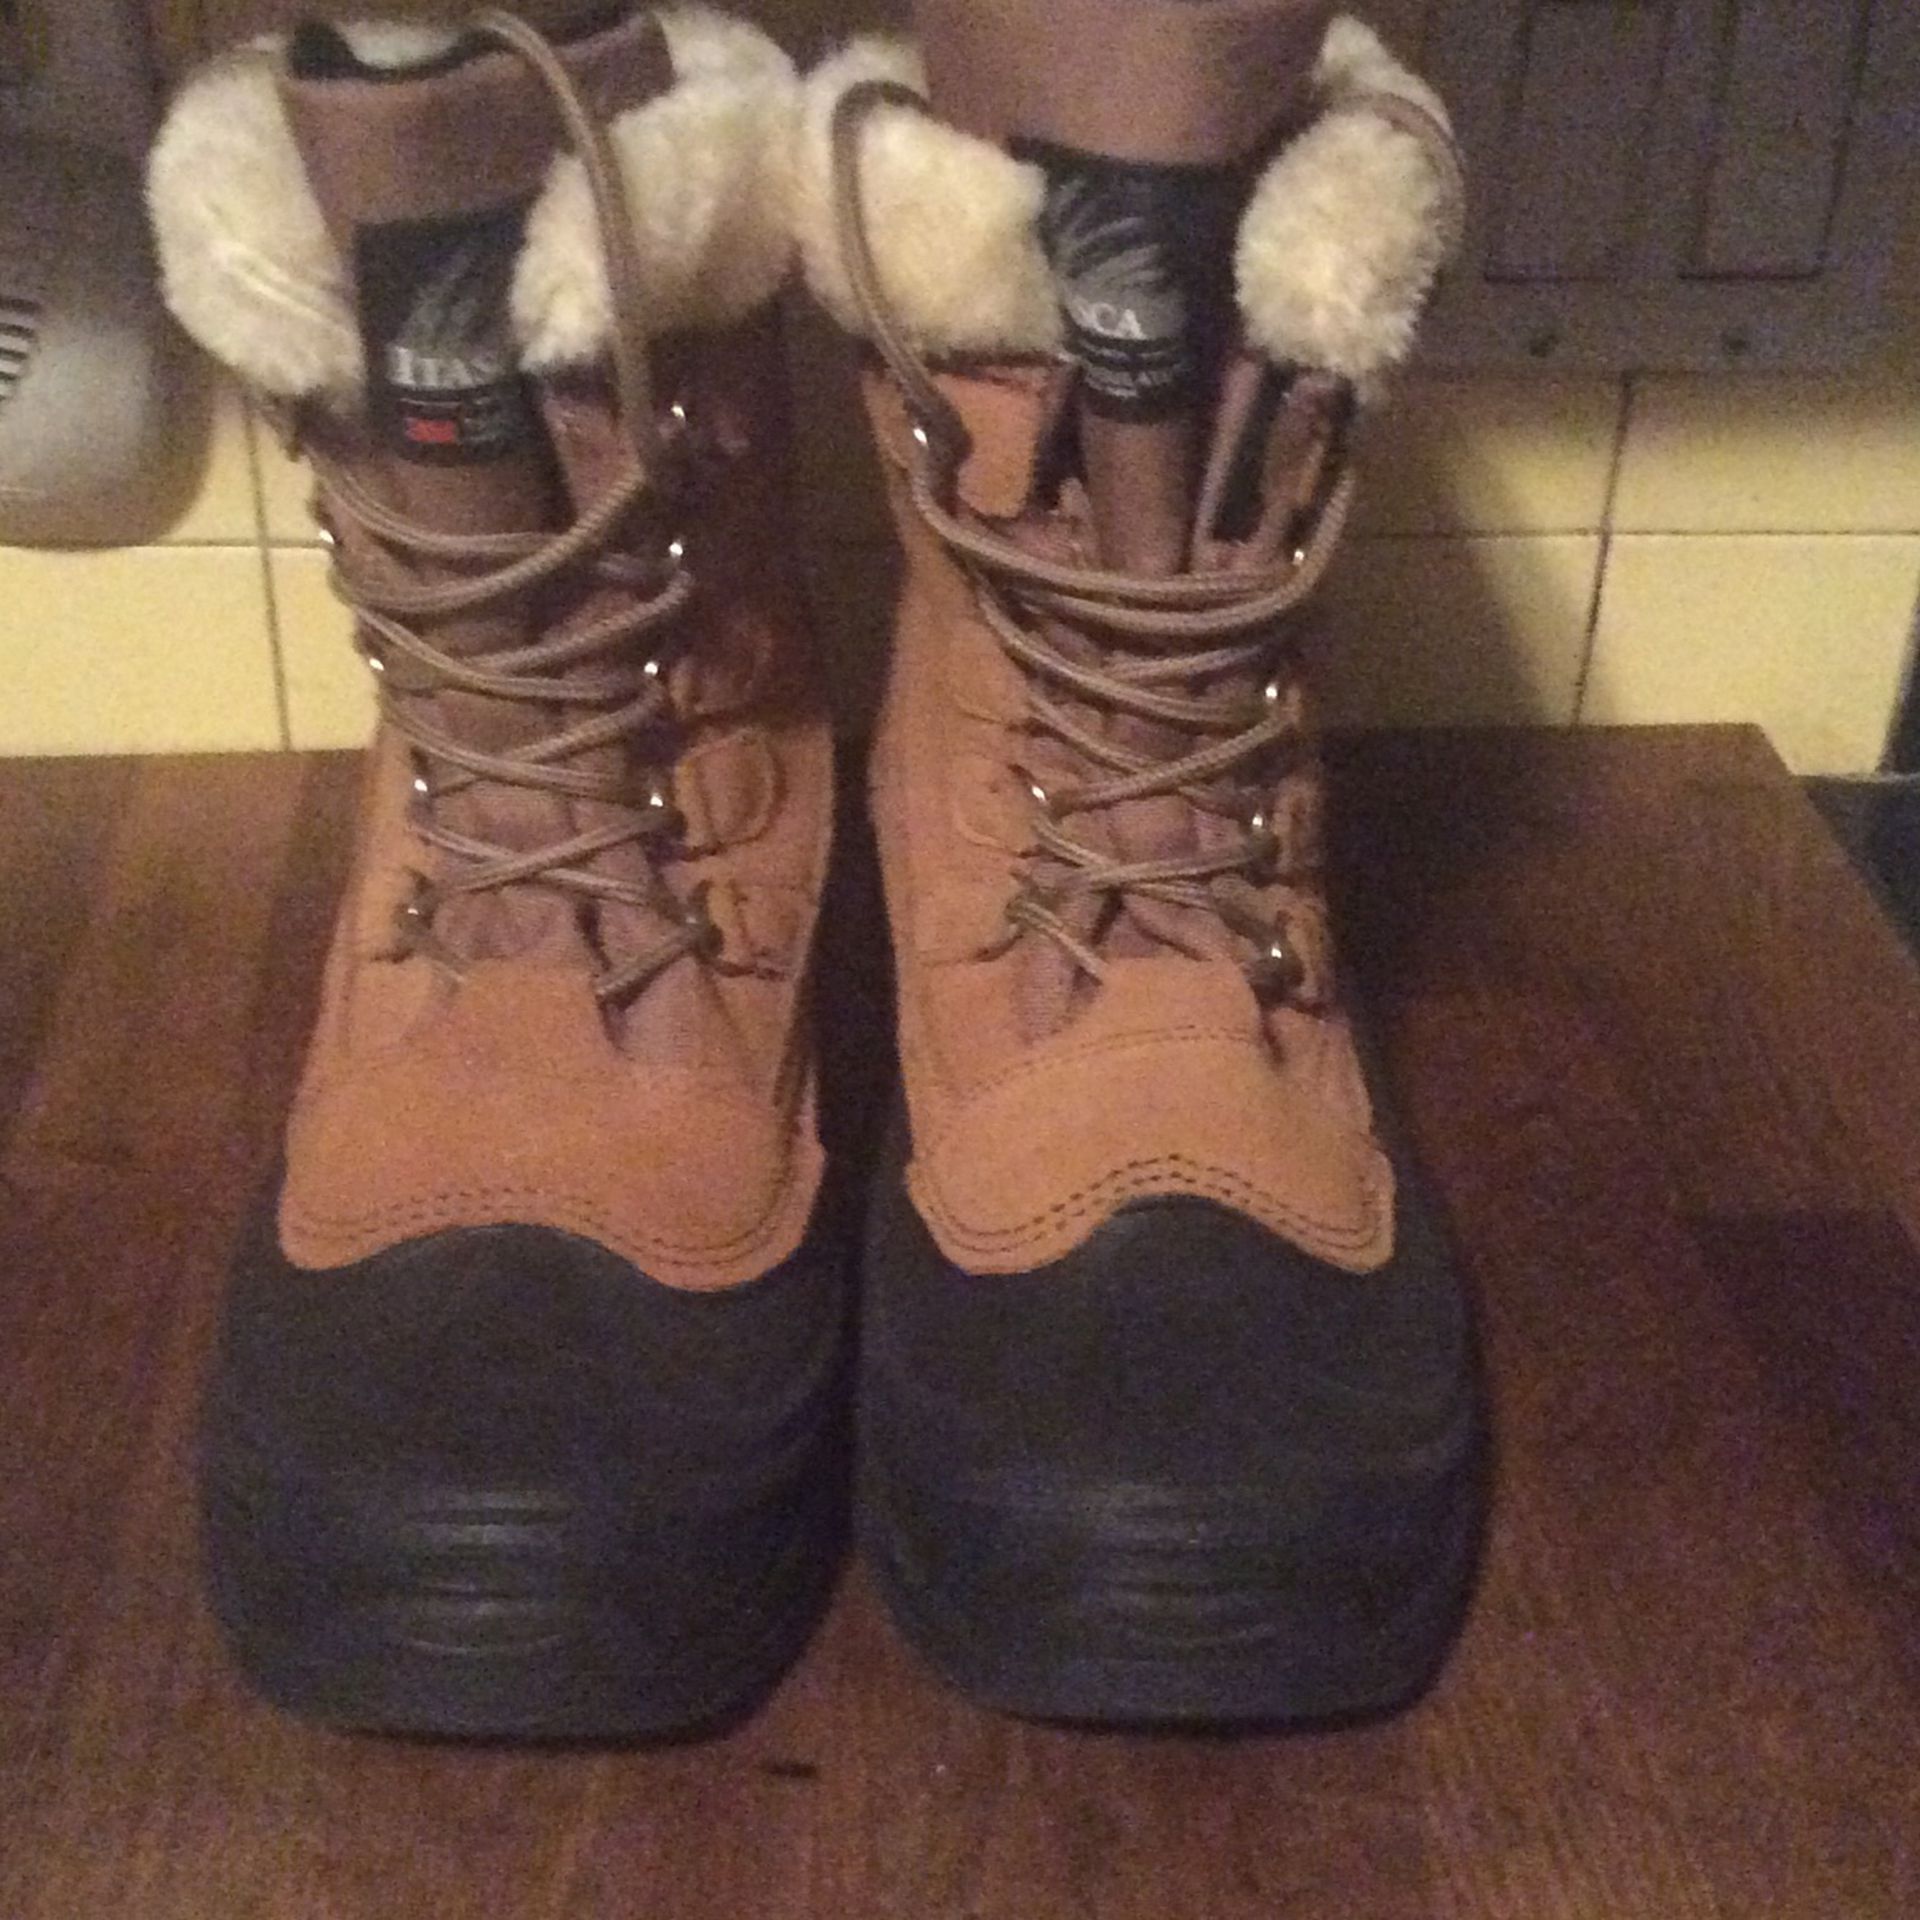 New ITASCA Ladies Boots. Size 7.